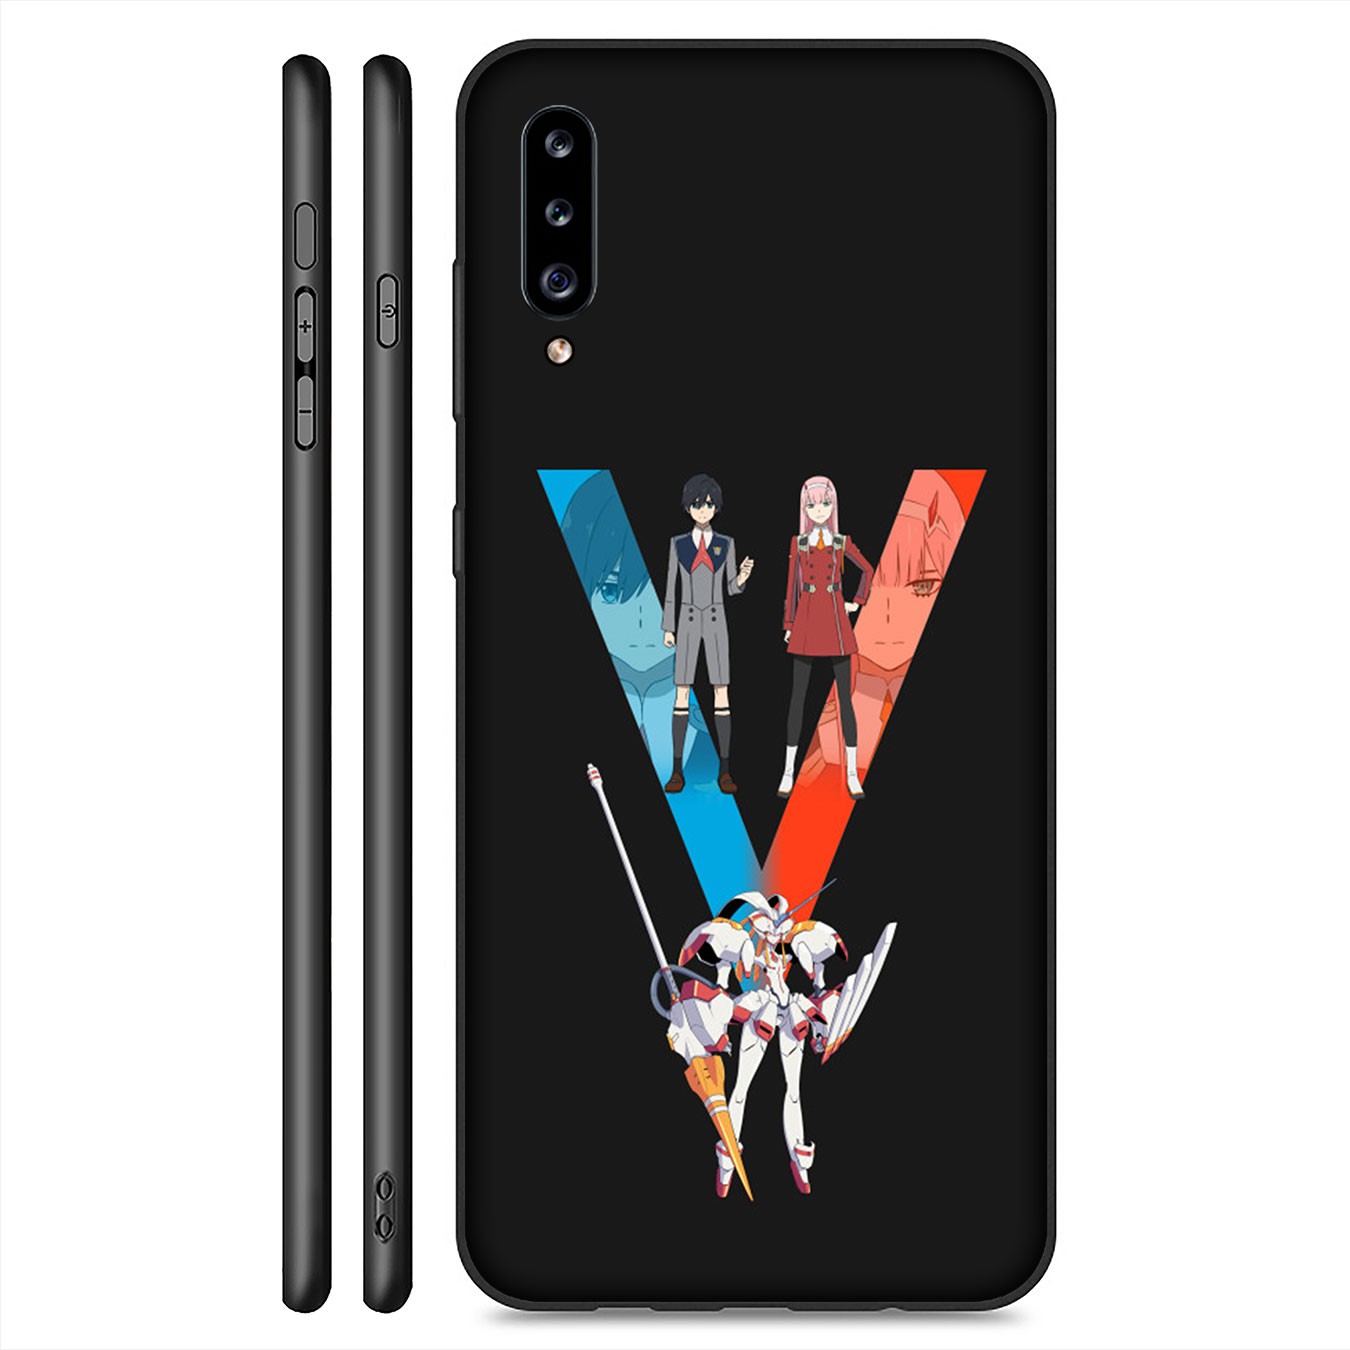 Samsung Galaxy A9 A8 A7 A6 Plus J8 2018 + A21S A70 M20 A6+ A8+ 6Plus Casing Soft Silicone Darling in The Franxx 002 Phone Case